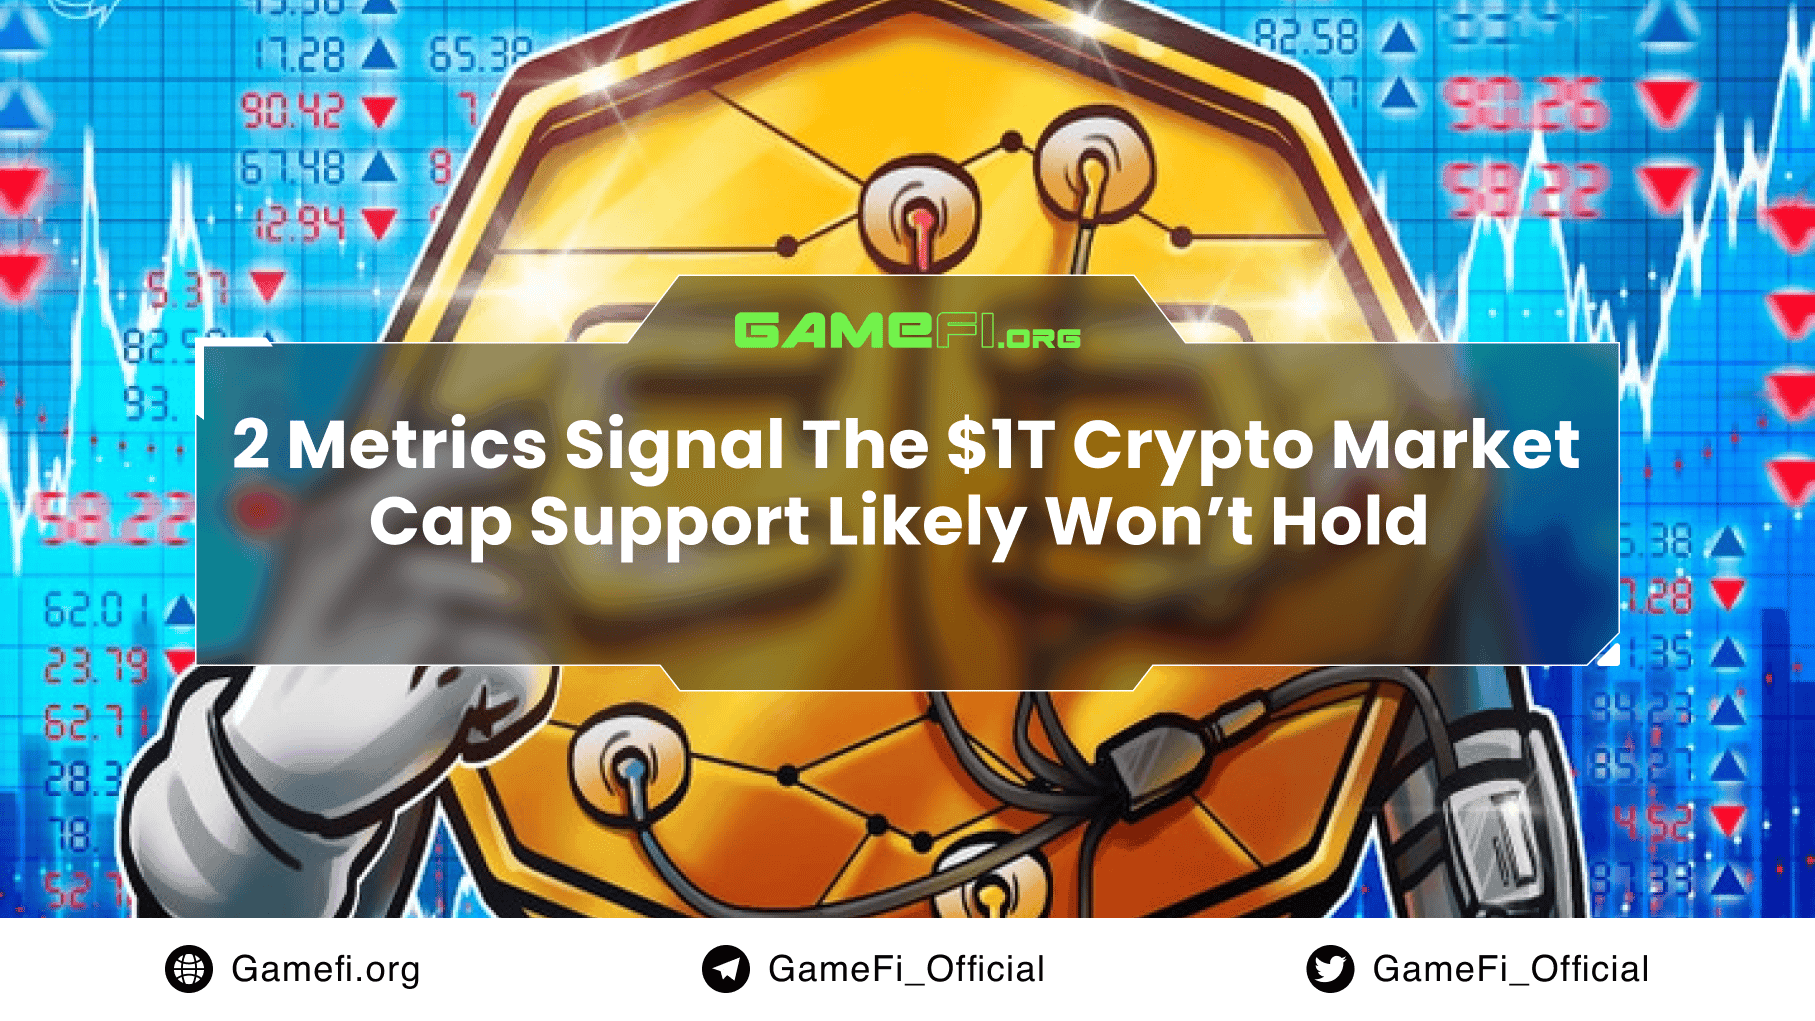 2 Metrics Signal The $1T Crypto Market Cap Support Likely Will Not Hold